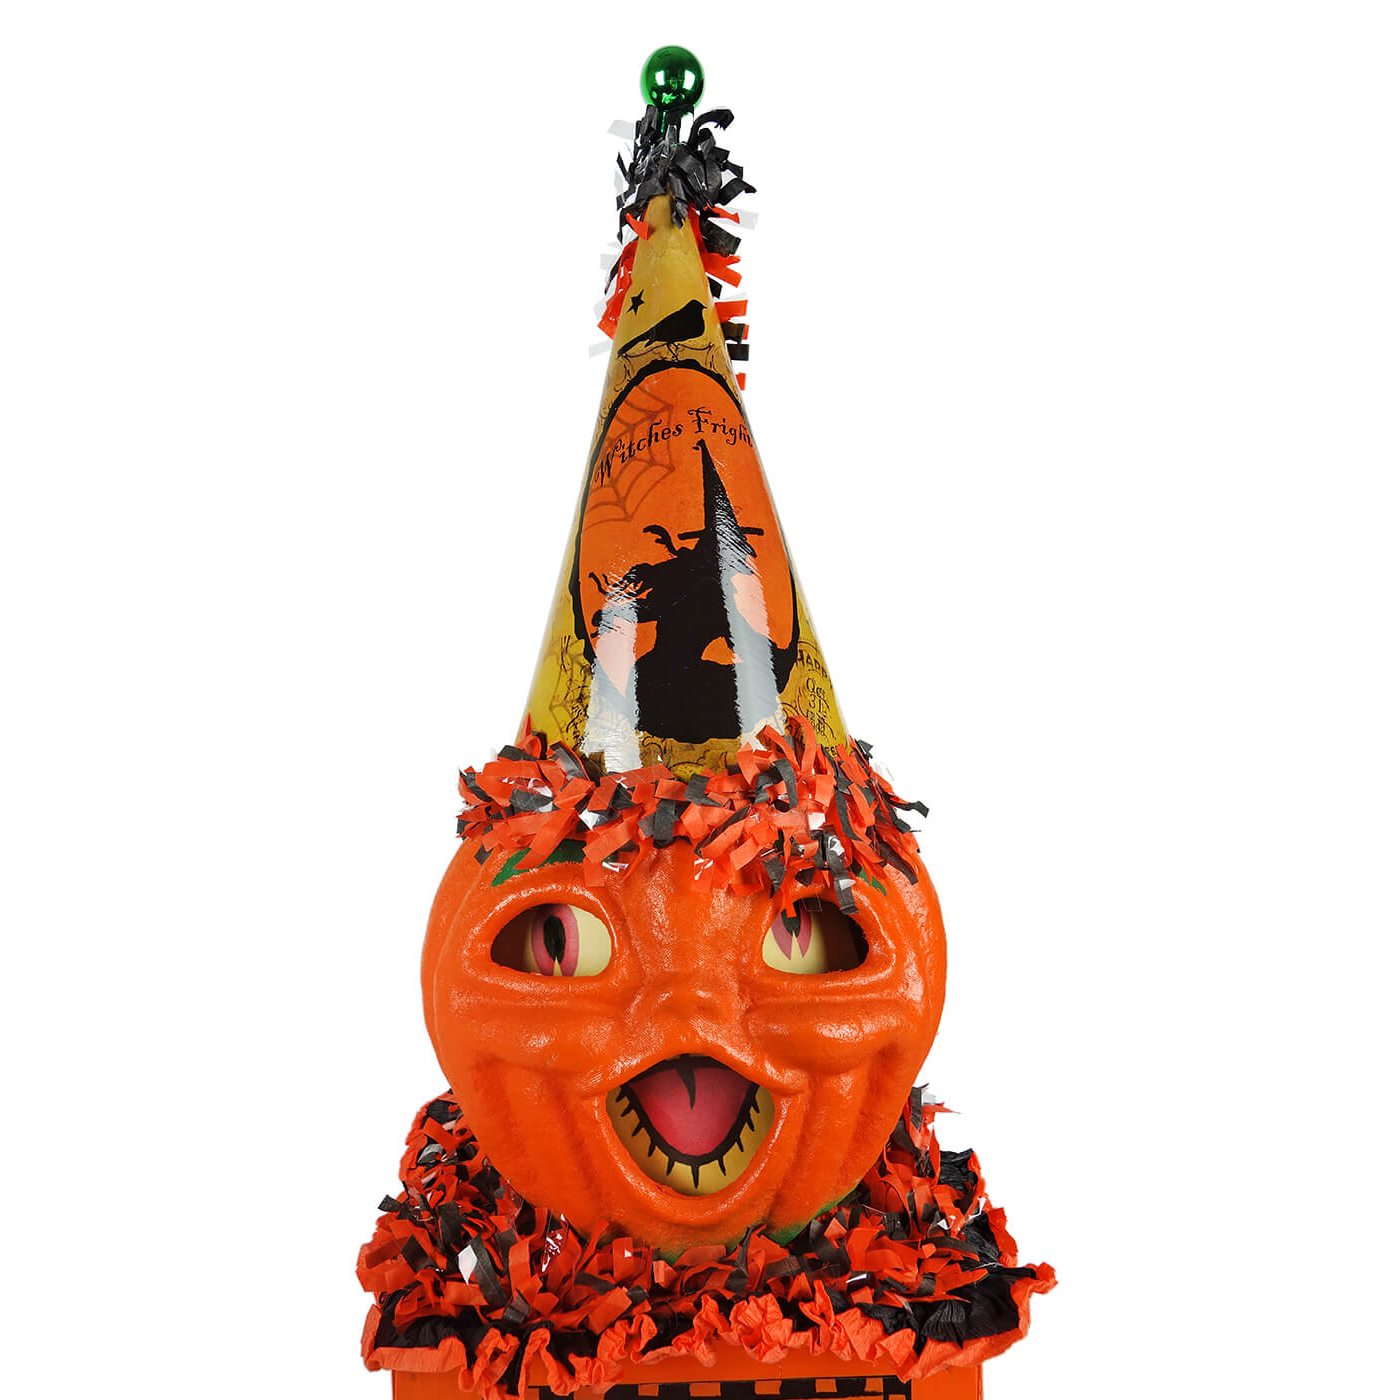 Pumpkin Jack in Party Hat on Box